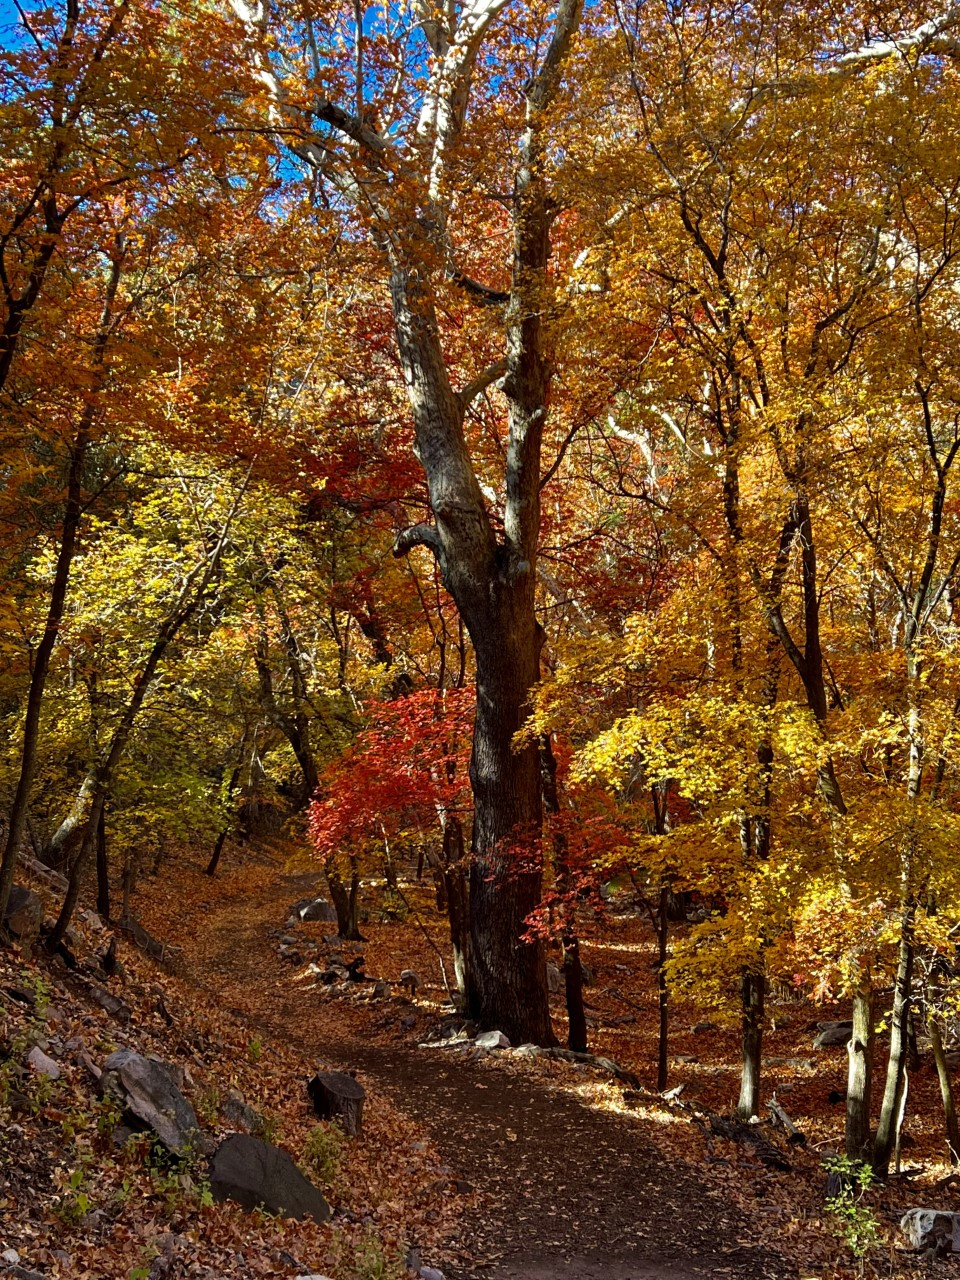 View of a nature trail in the forest during autumn, with trees full of orange and yellow leaves lining the path.